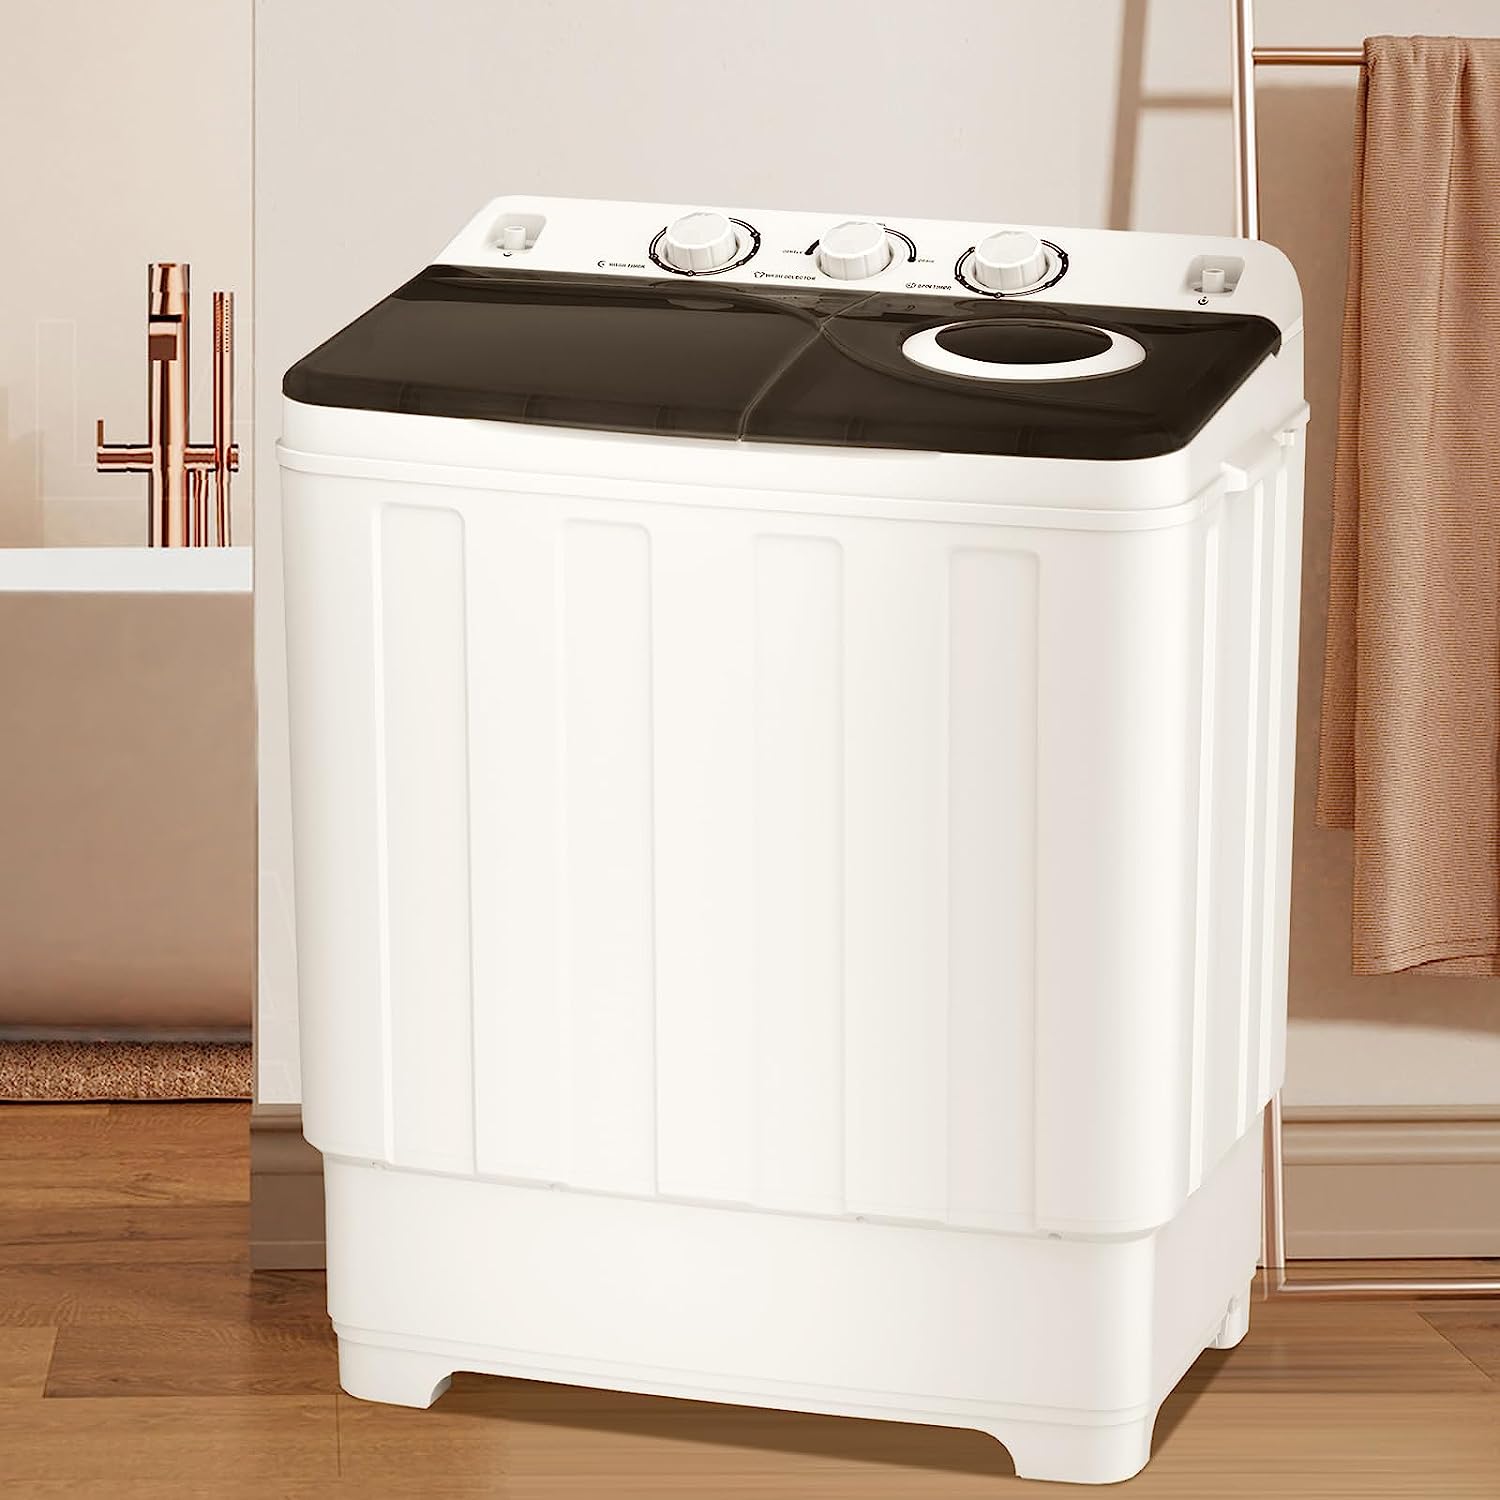 The Convenience of Countertop Washing Machines插图2